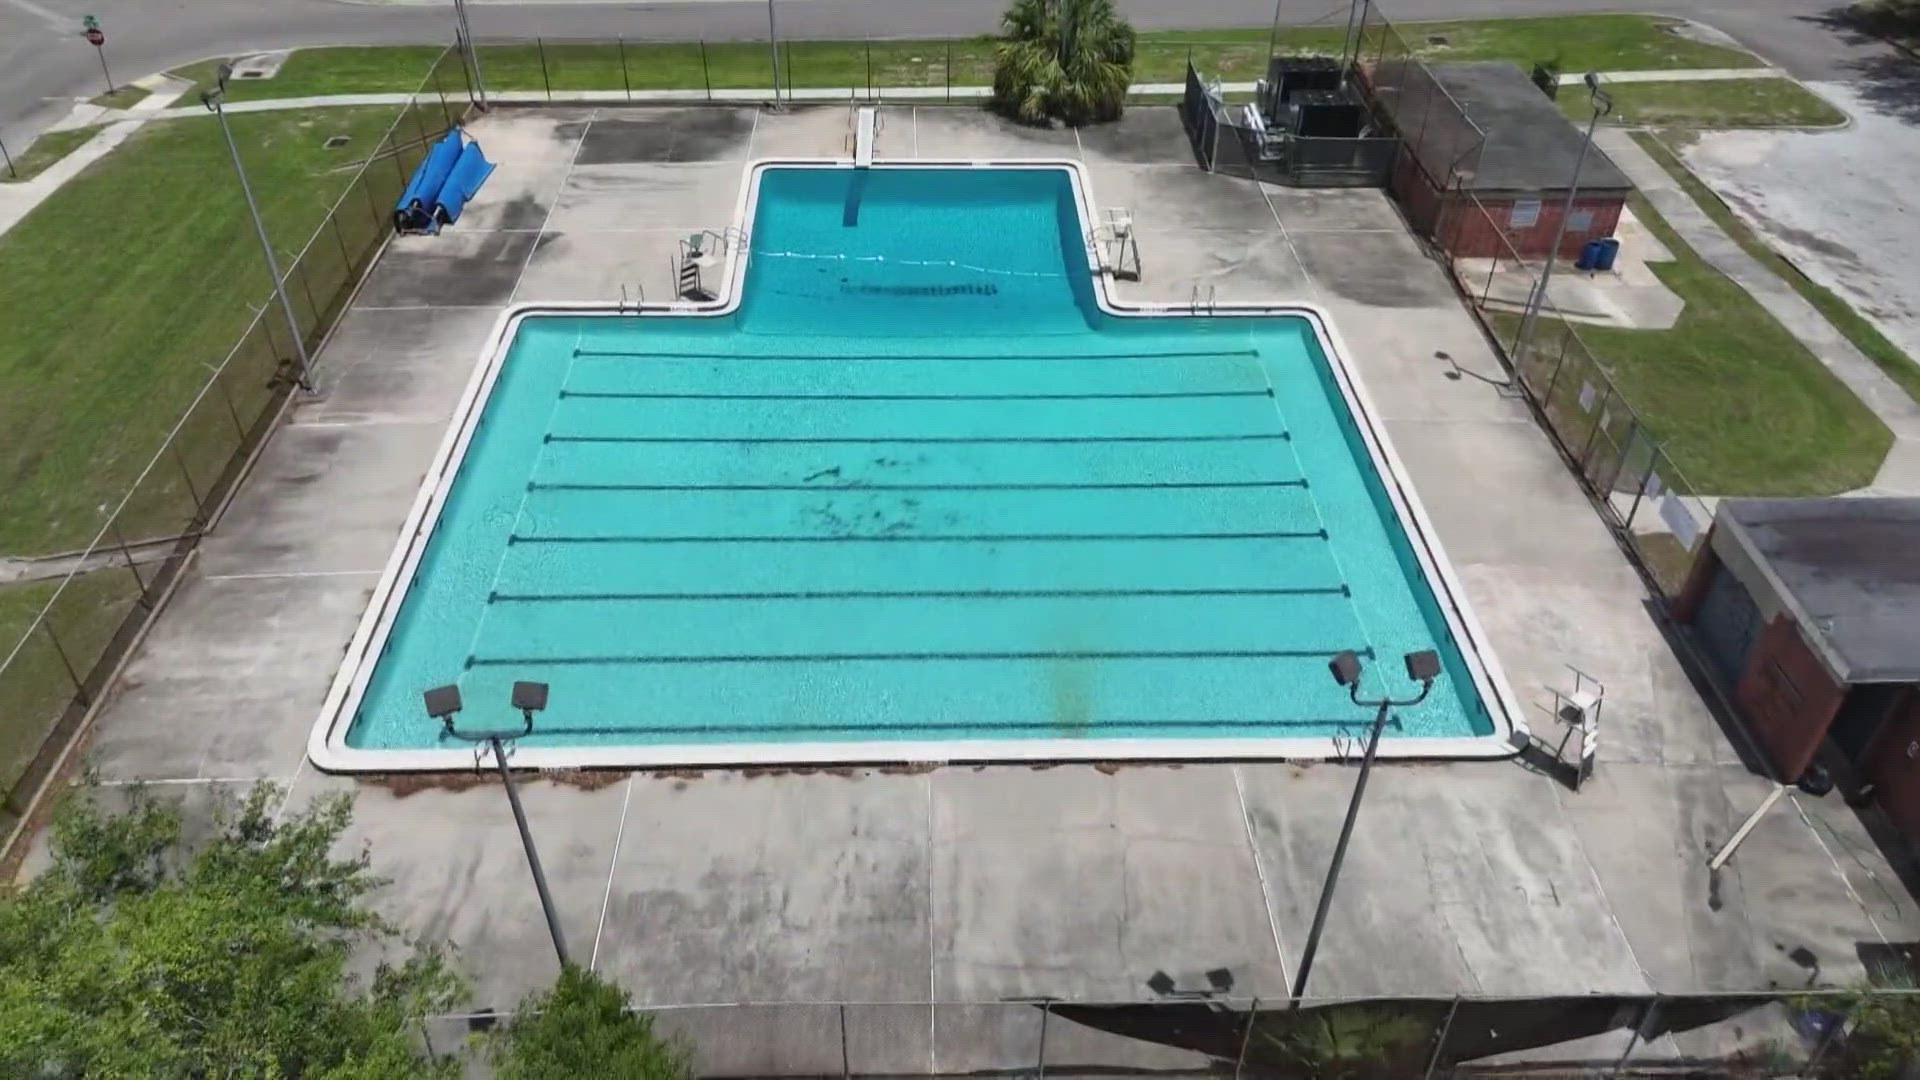 Nearly half of city pools were closed last year.